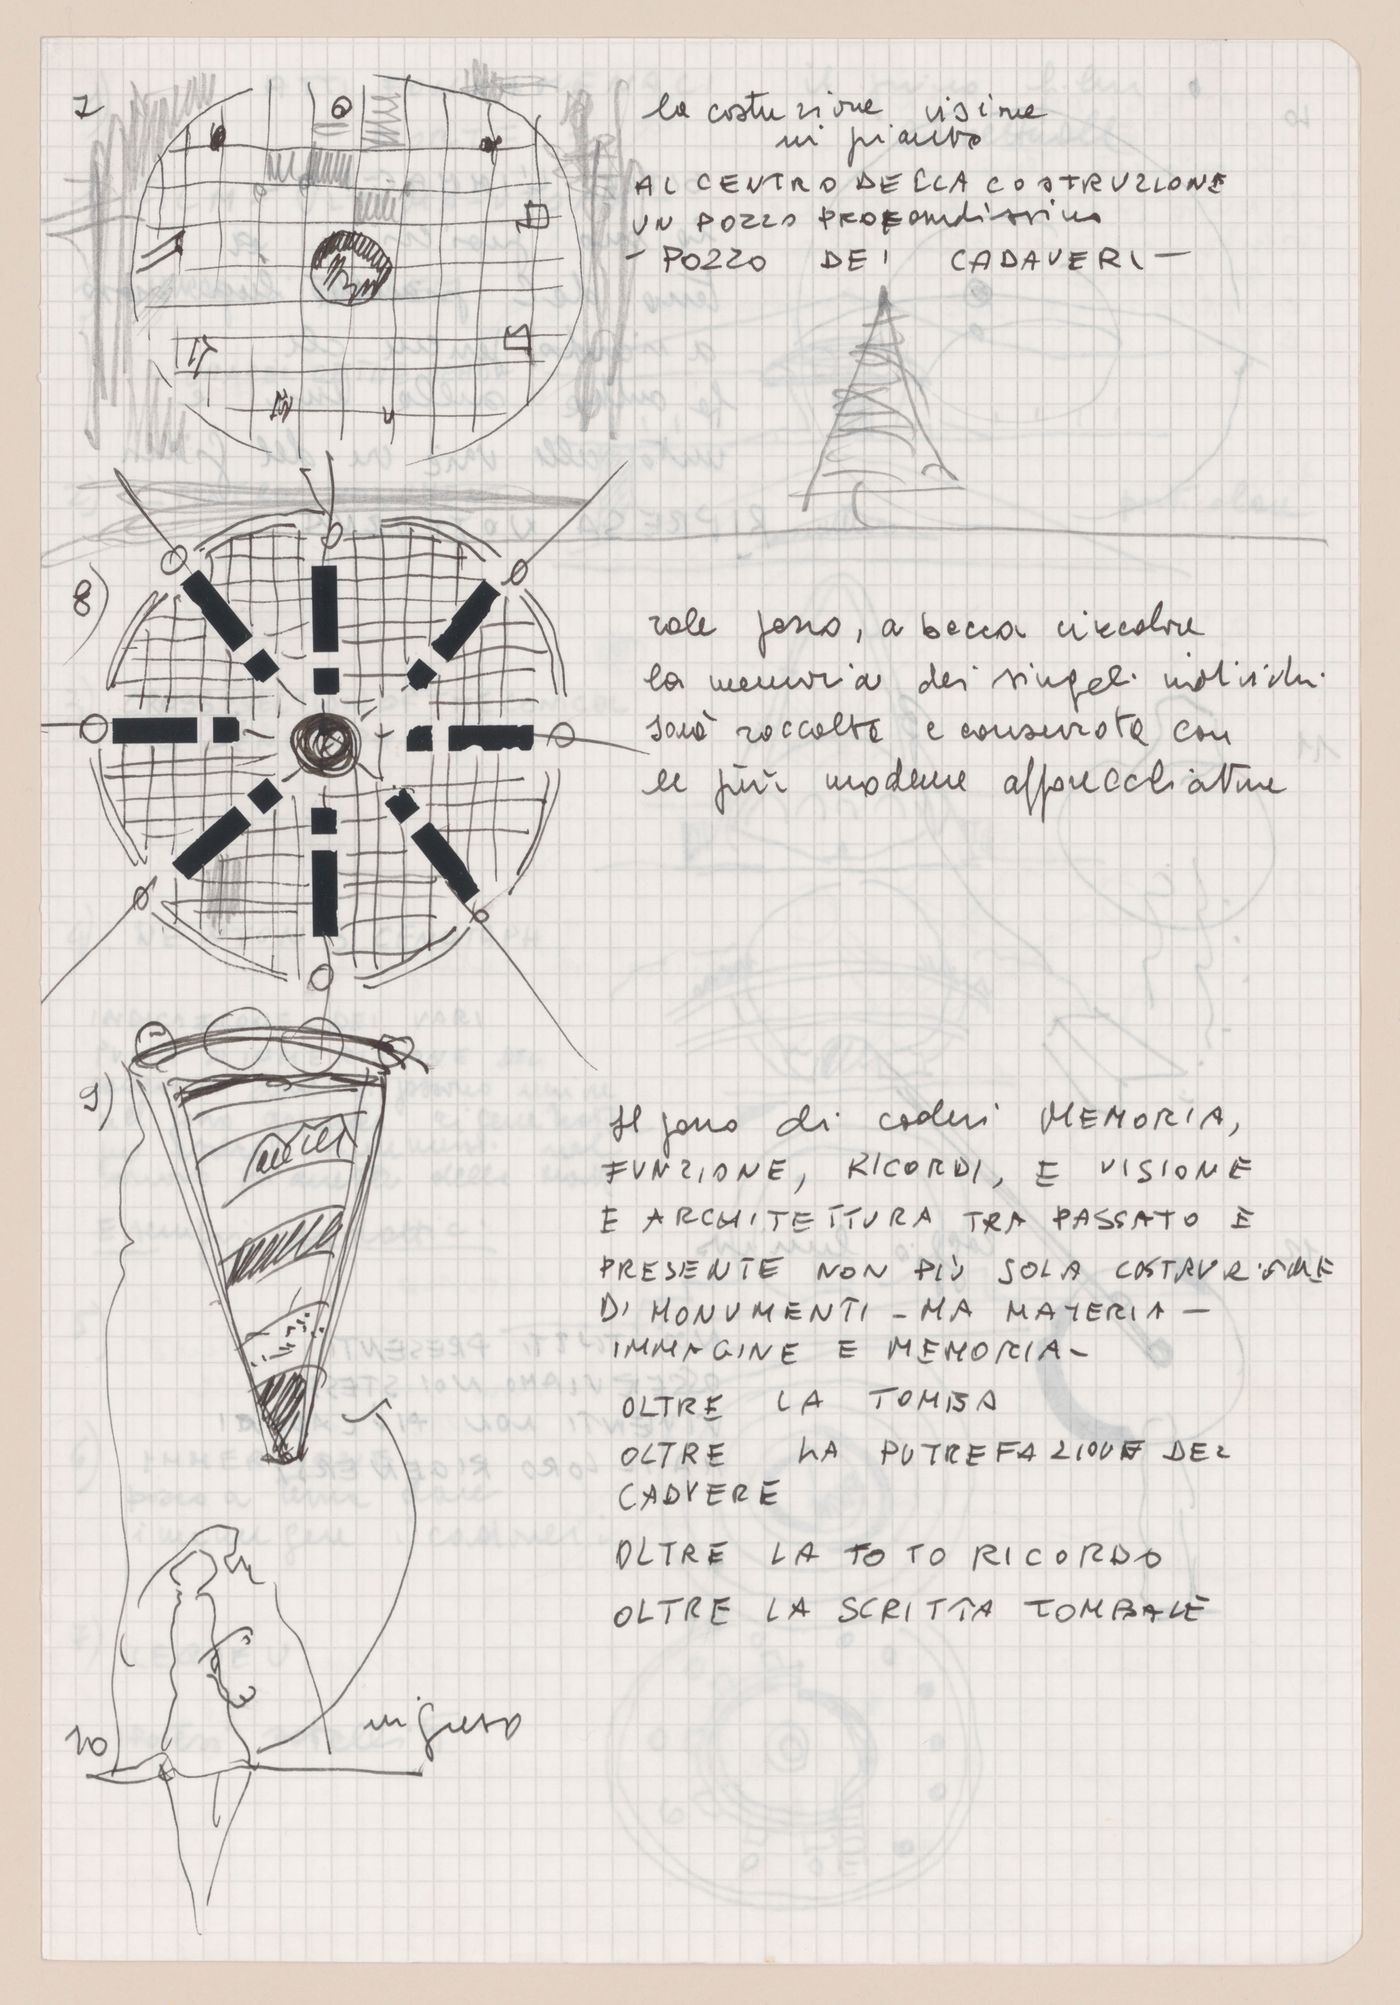 Sketches and notes for Modena cemetery competition, Modena, Italy